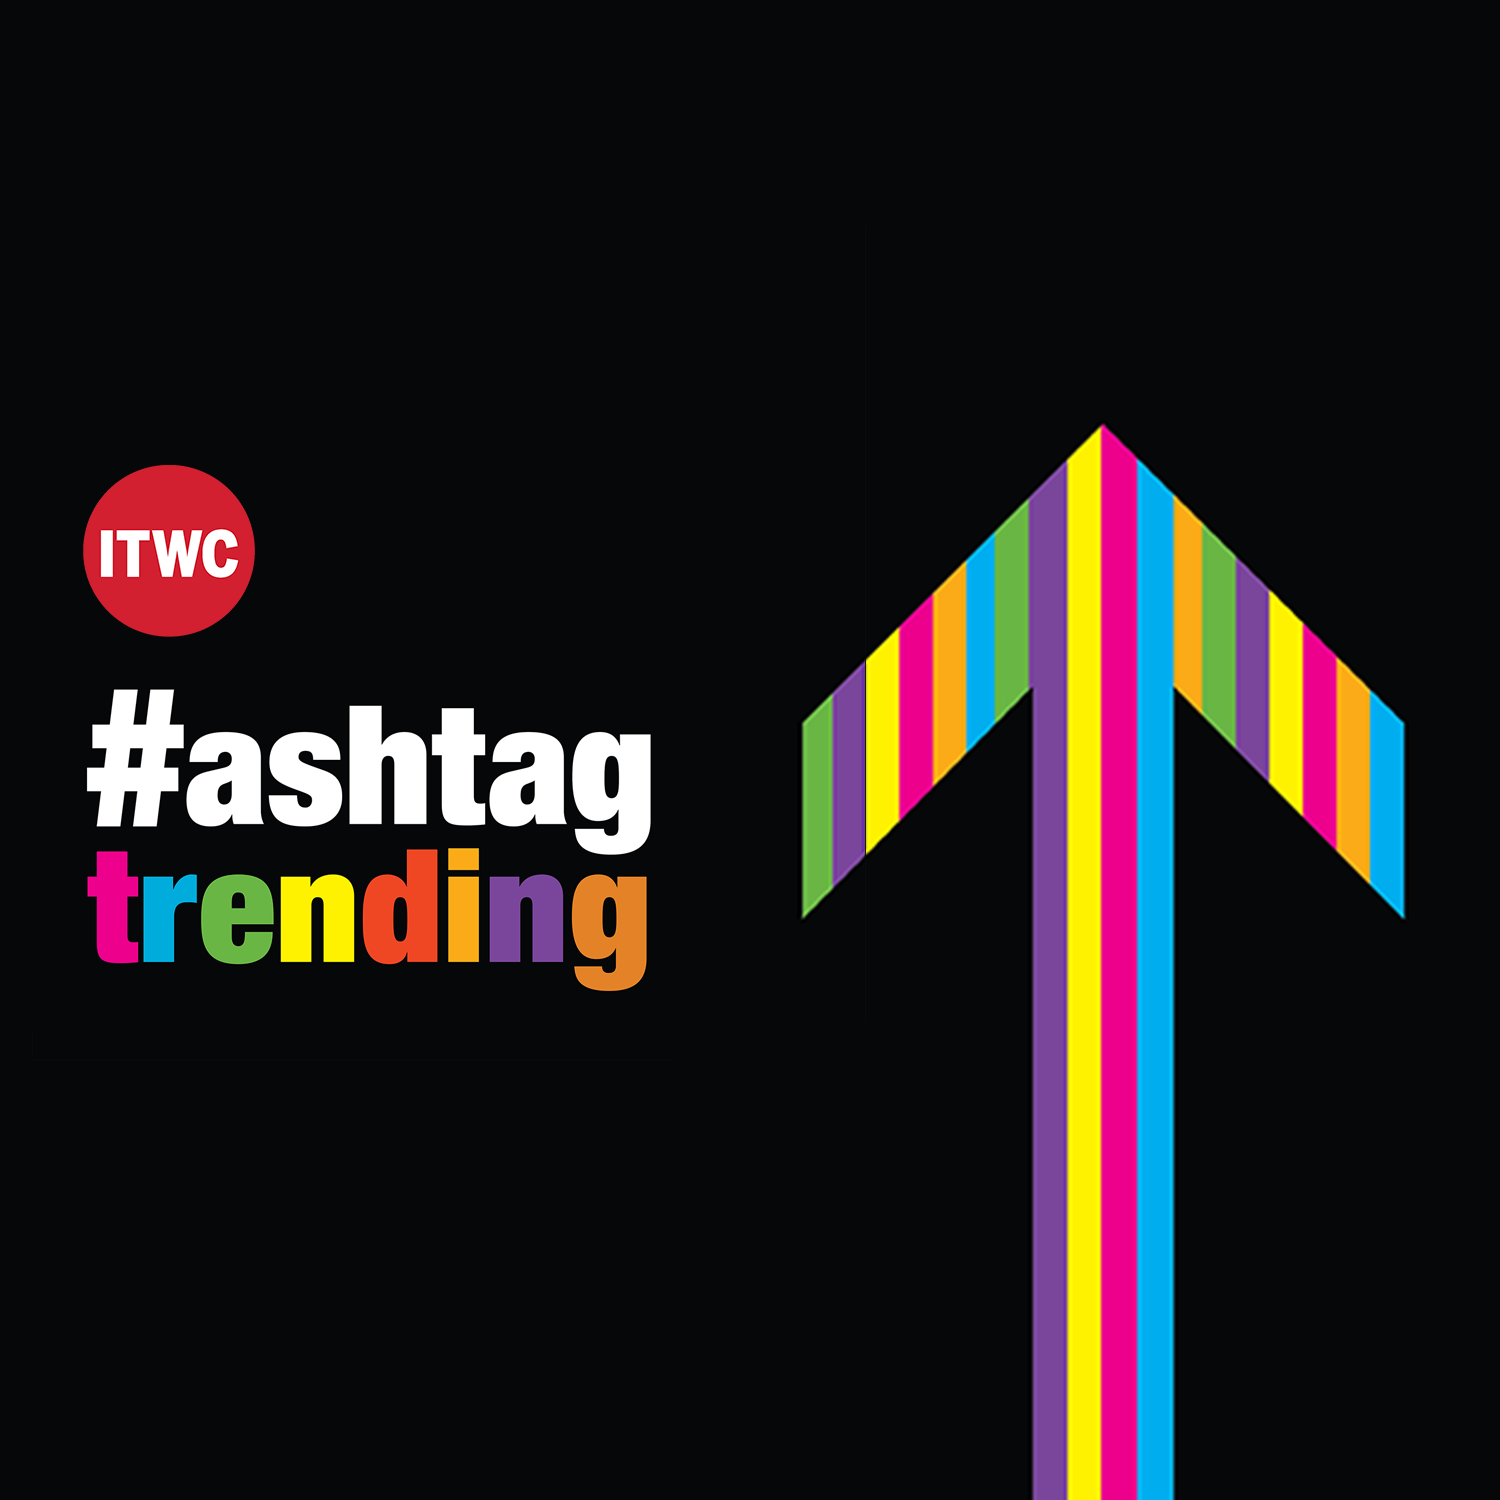 Hashtag Trending, May 10, 2021 – Most users’ like Apple’s ATT feature; Cyberattack shuts down …